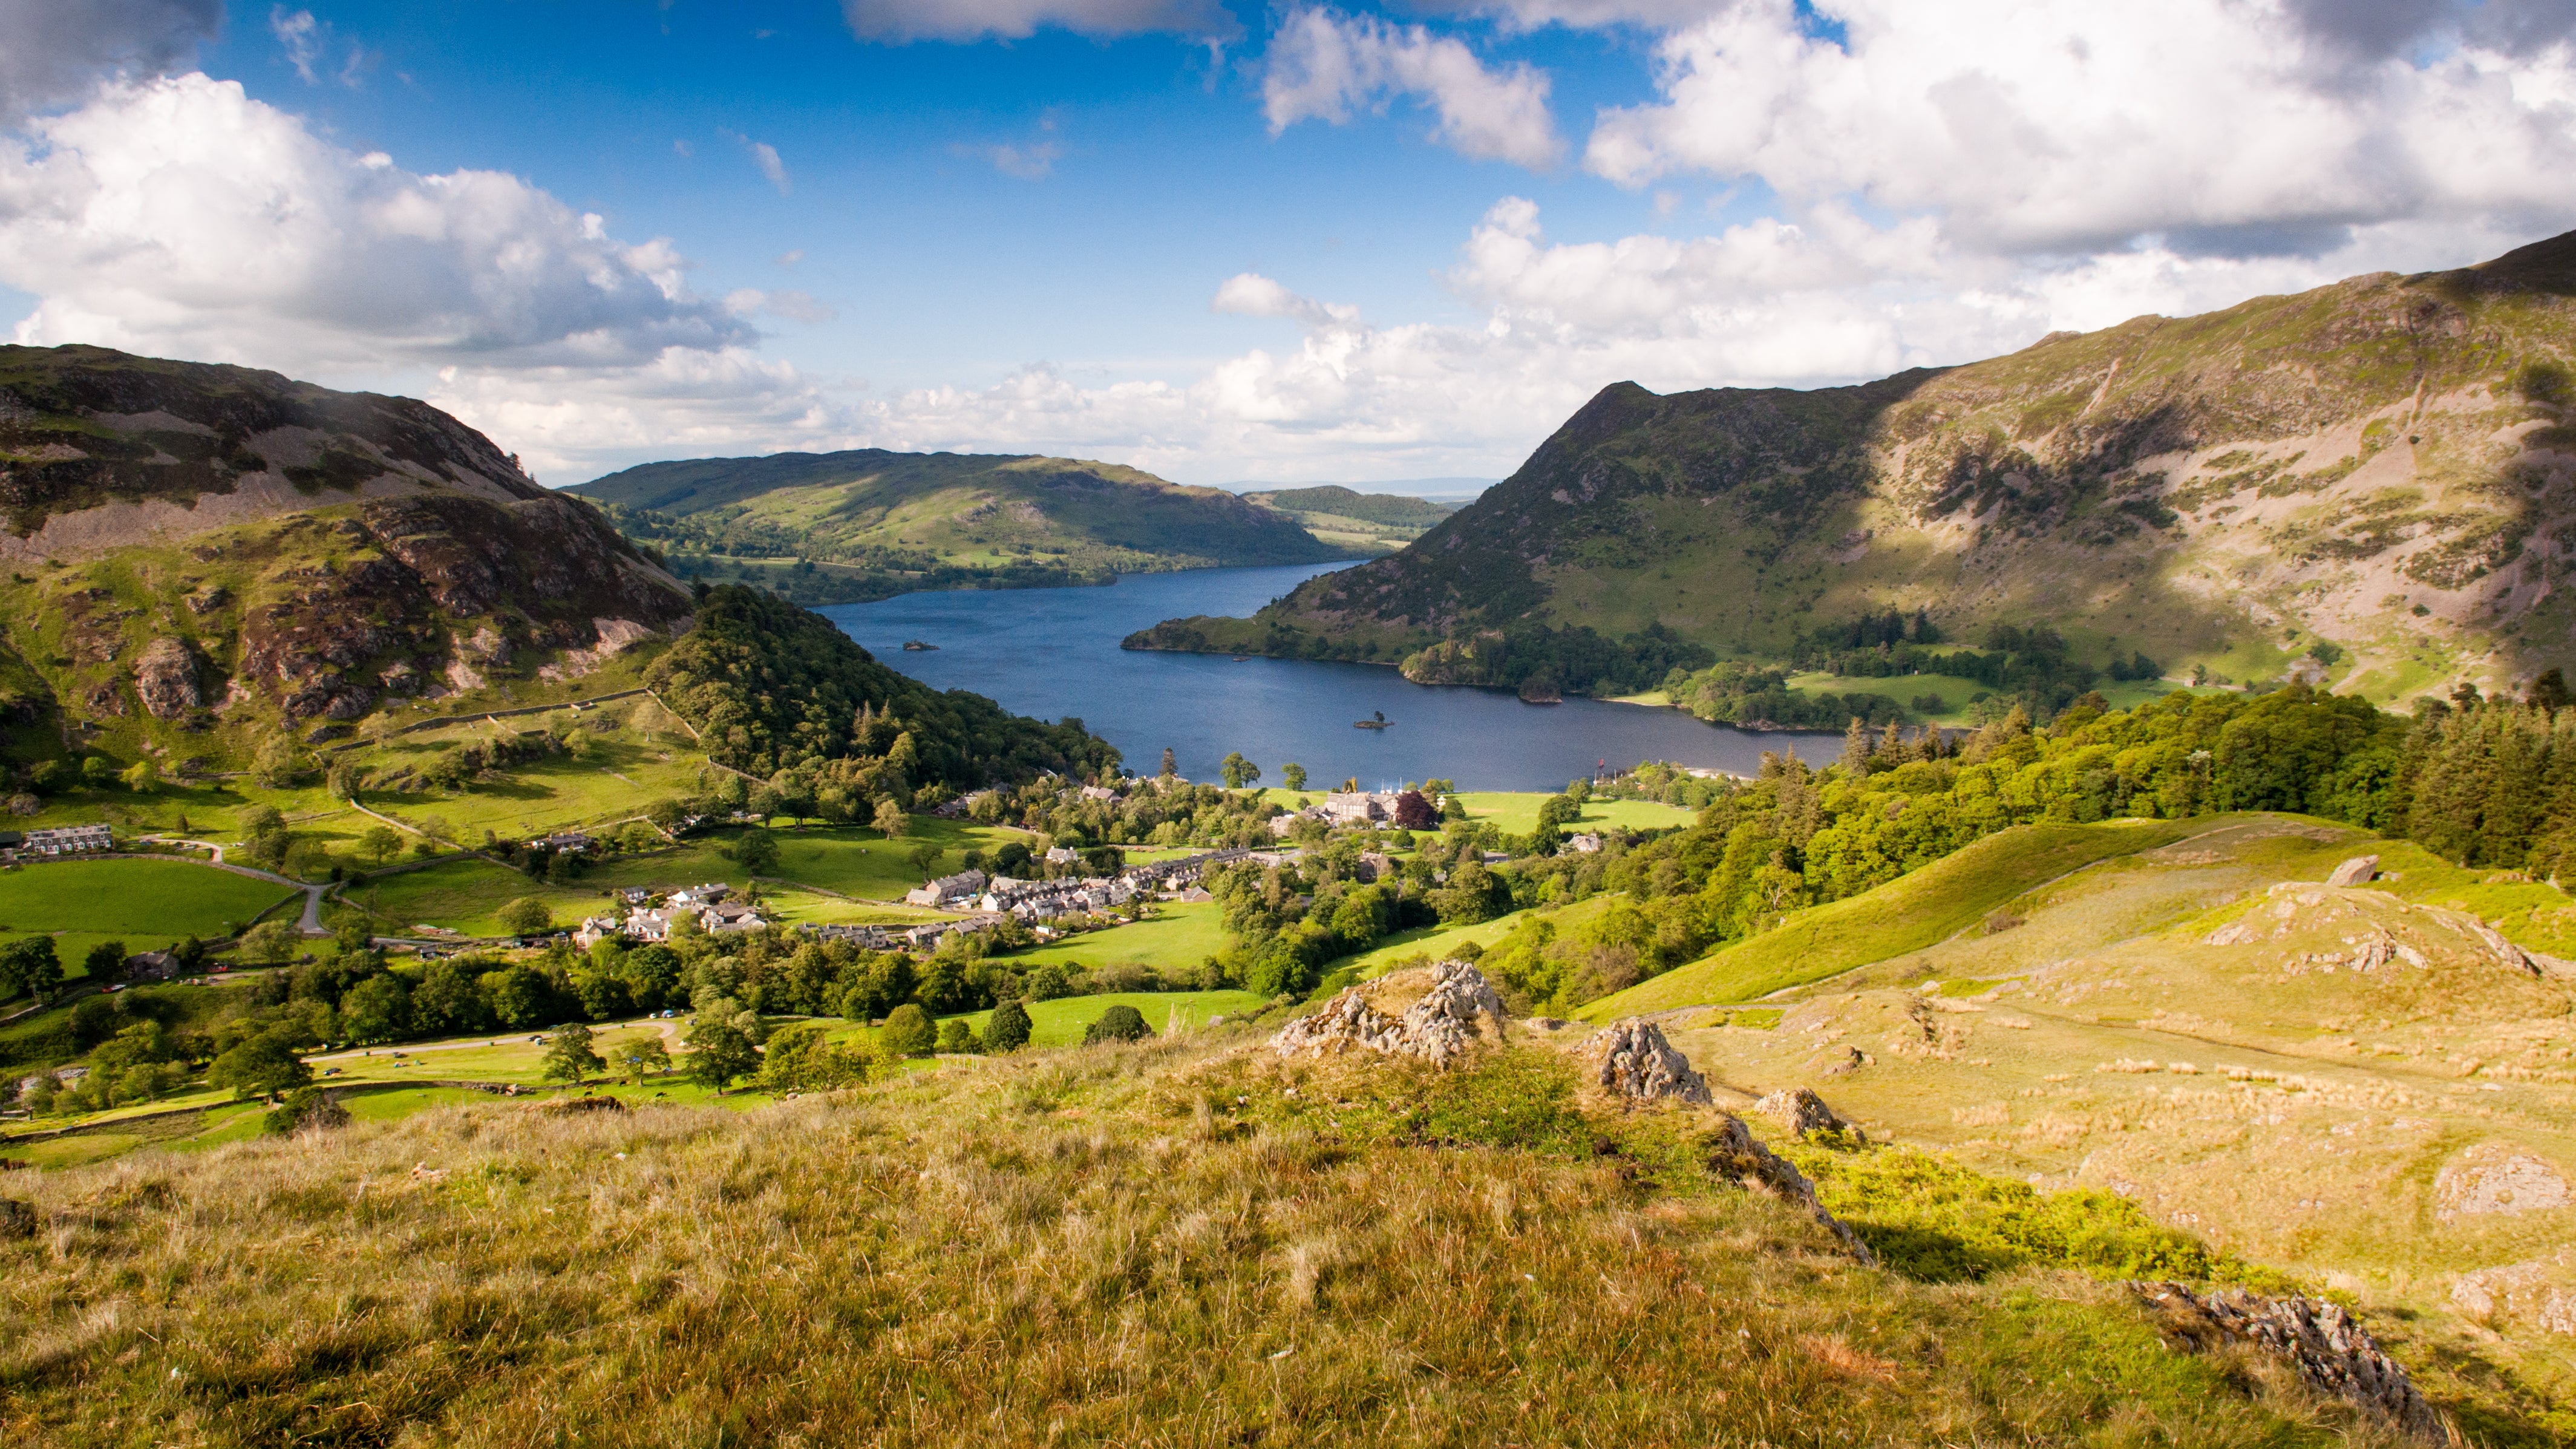 Ullswater in the Lake District at Glenridding, where Will was buzzed by RAF Typhoons